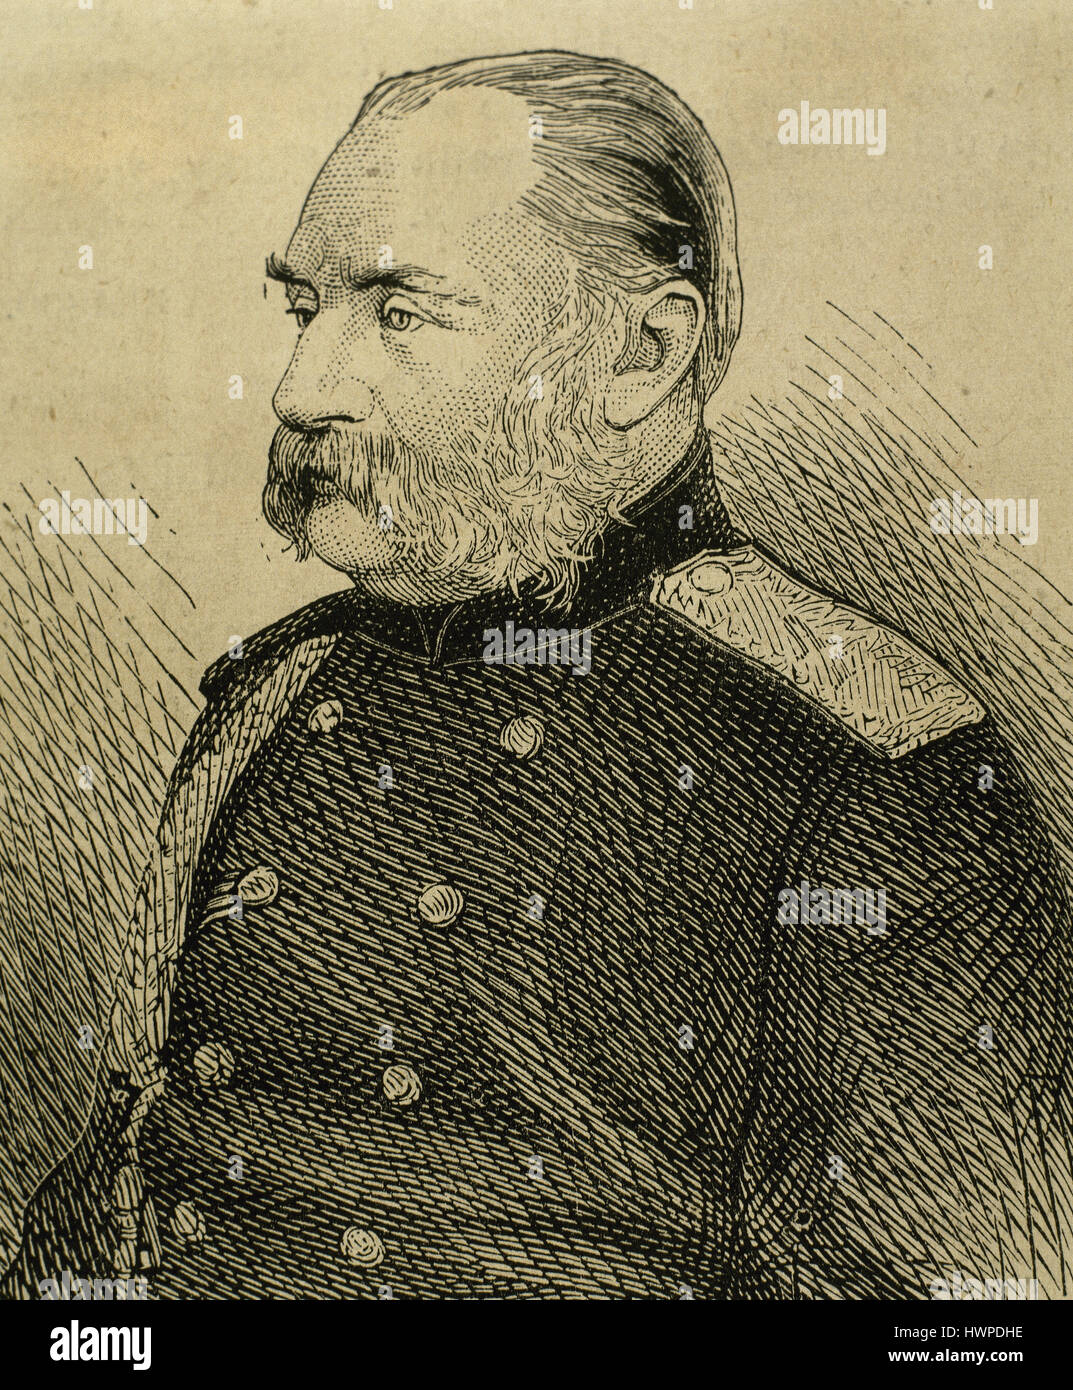 The War in the East. General Perokoitschitzsky of the Russian Army, Chief of Staff of the Southern Army. Portrait. Engraving. 'La Ilustracion Espanola y Americana', 1877, Stock Photo